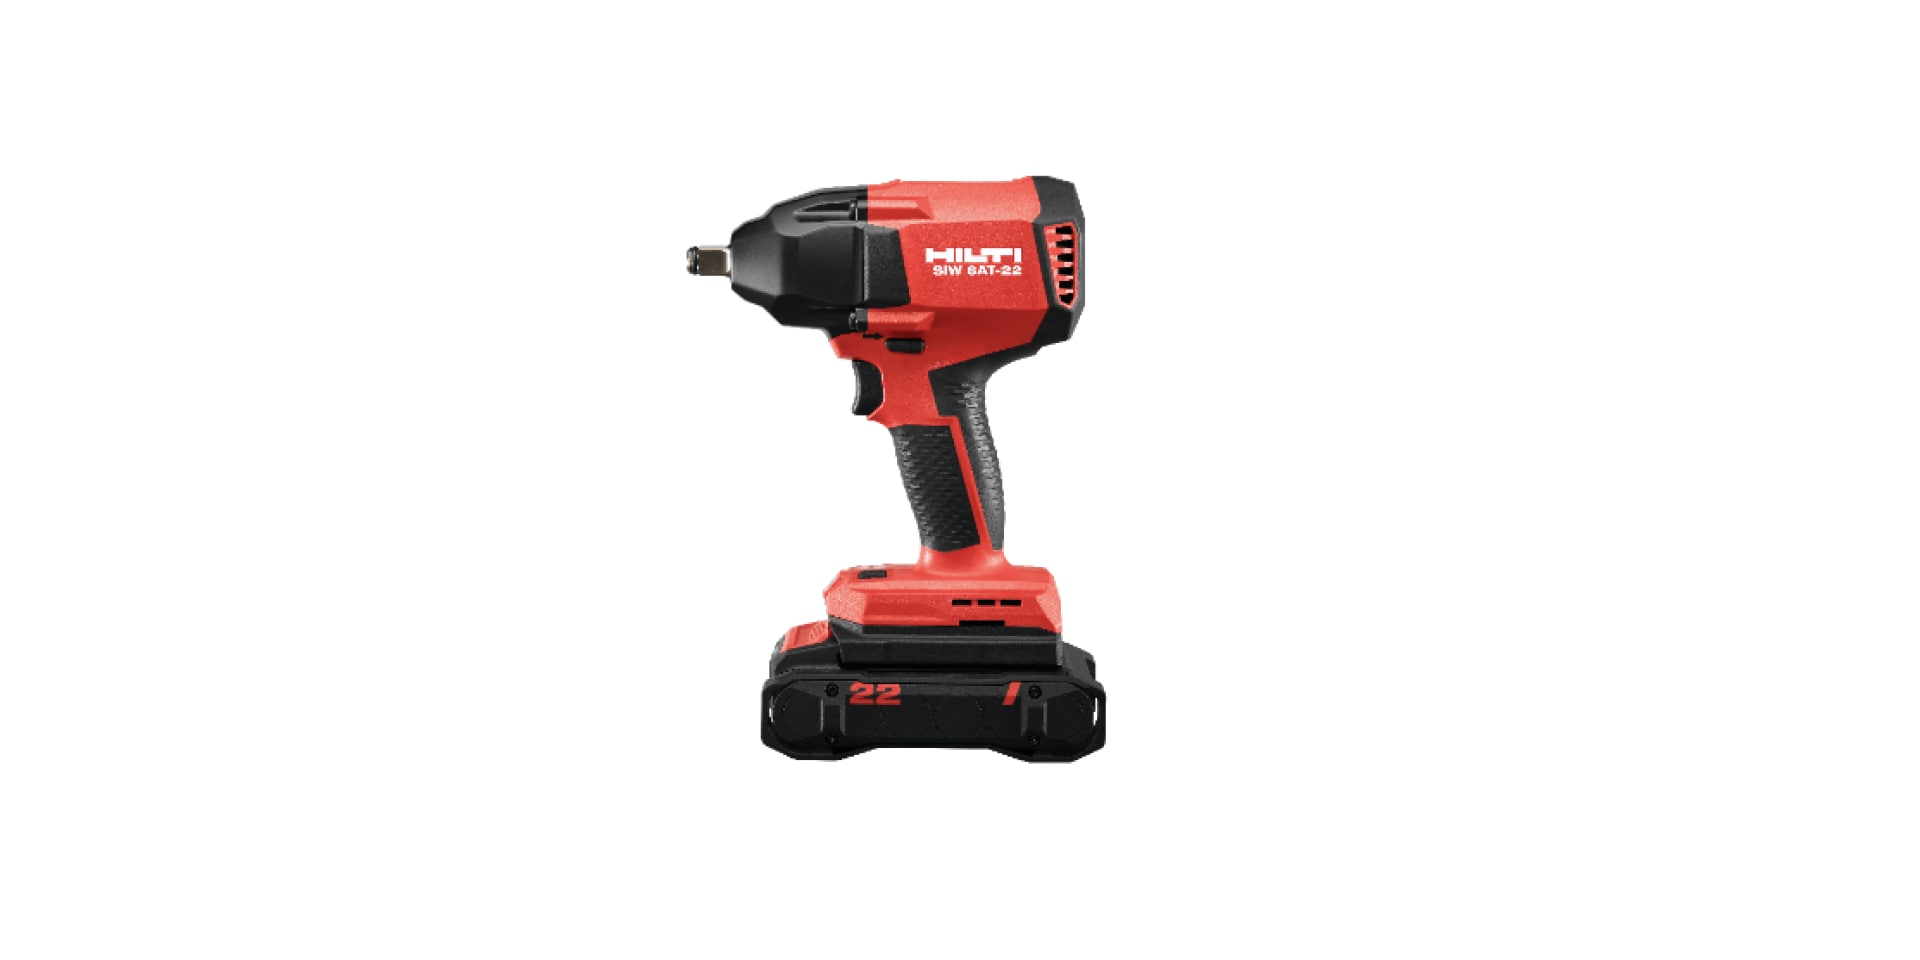 SIW 6AT-22 1/2 CORDLESS IMPACT WRENCH